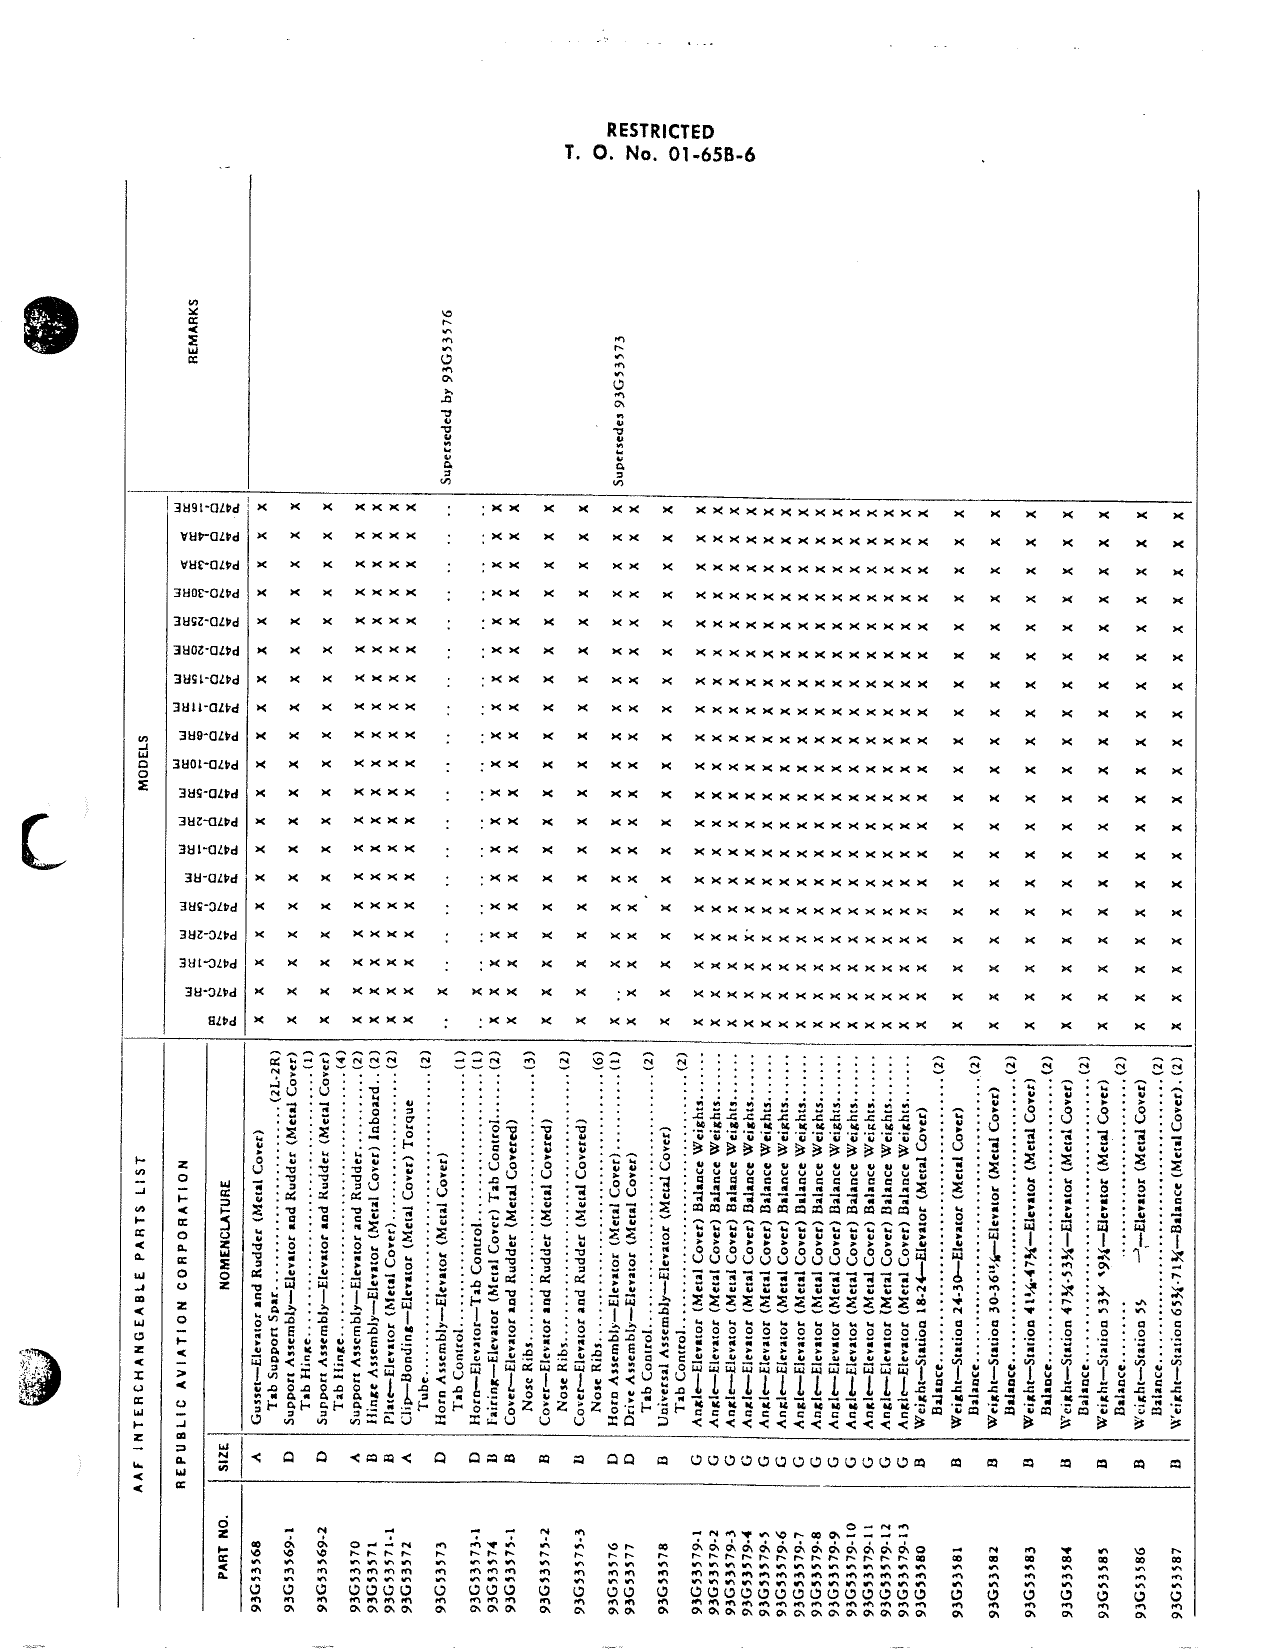 Sample page 129 from AirCorps Library document: Interchangeable Parts List - P-47